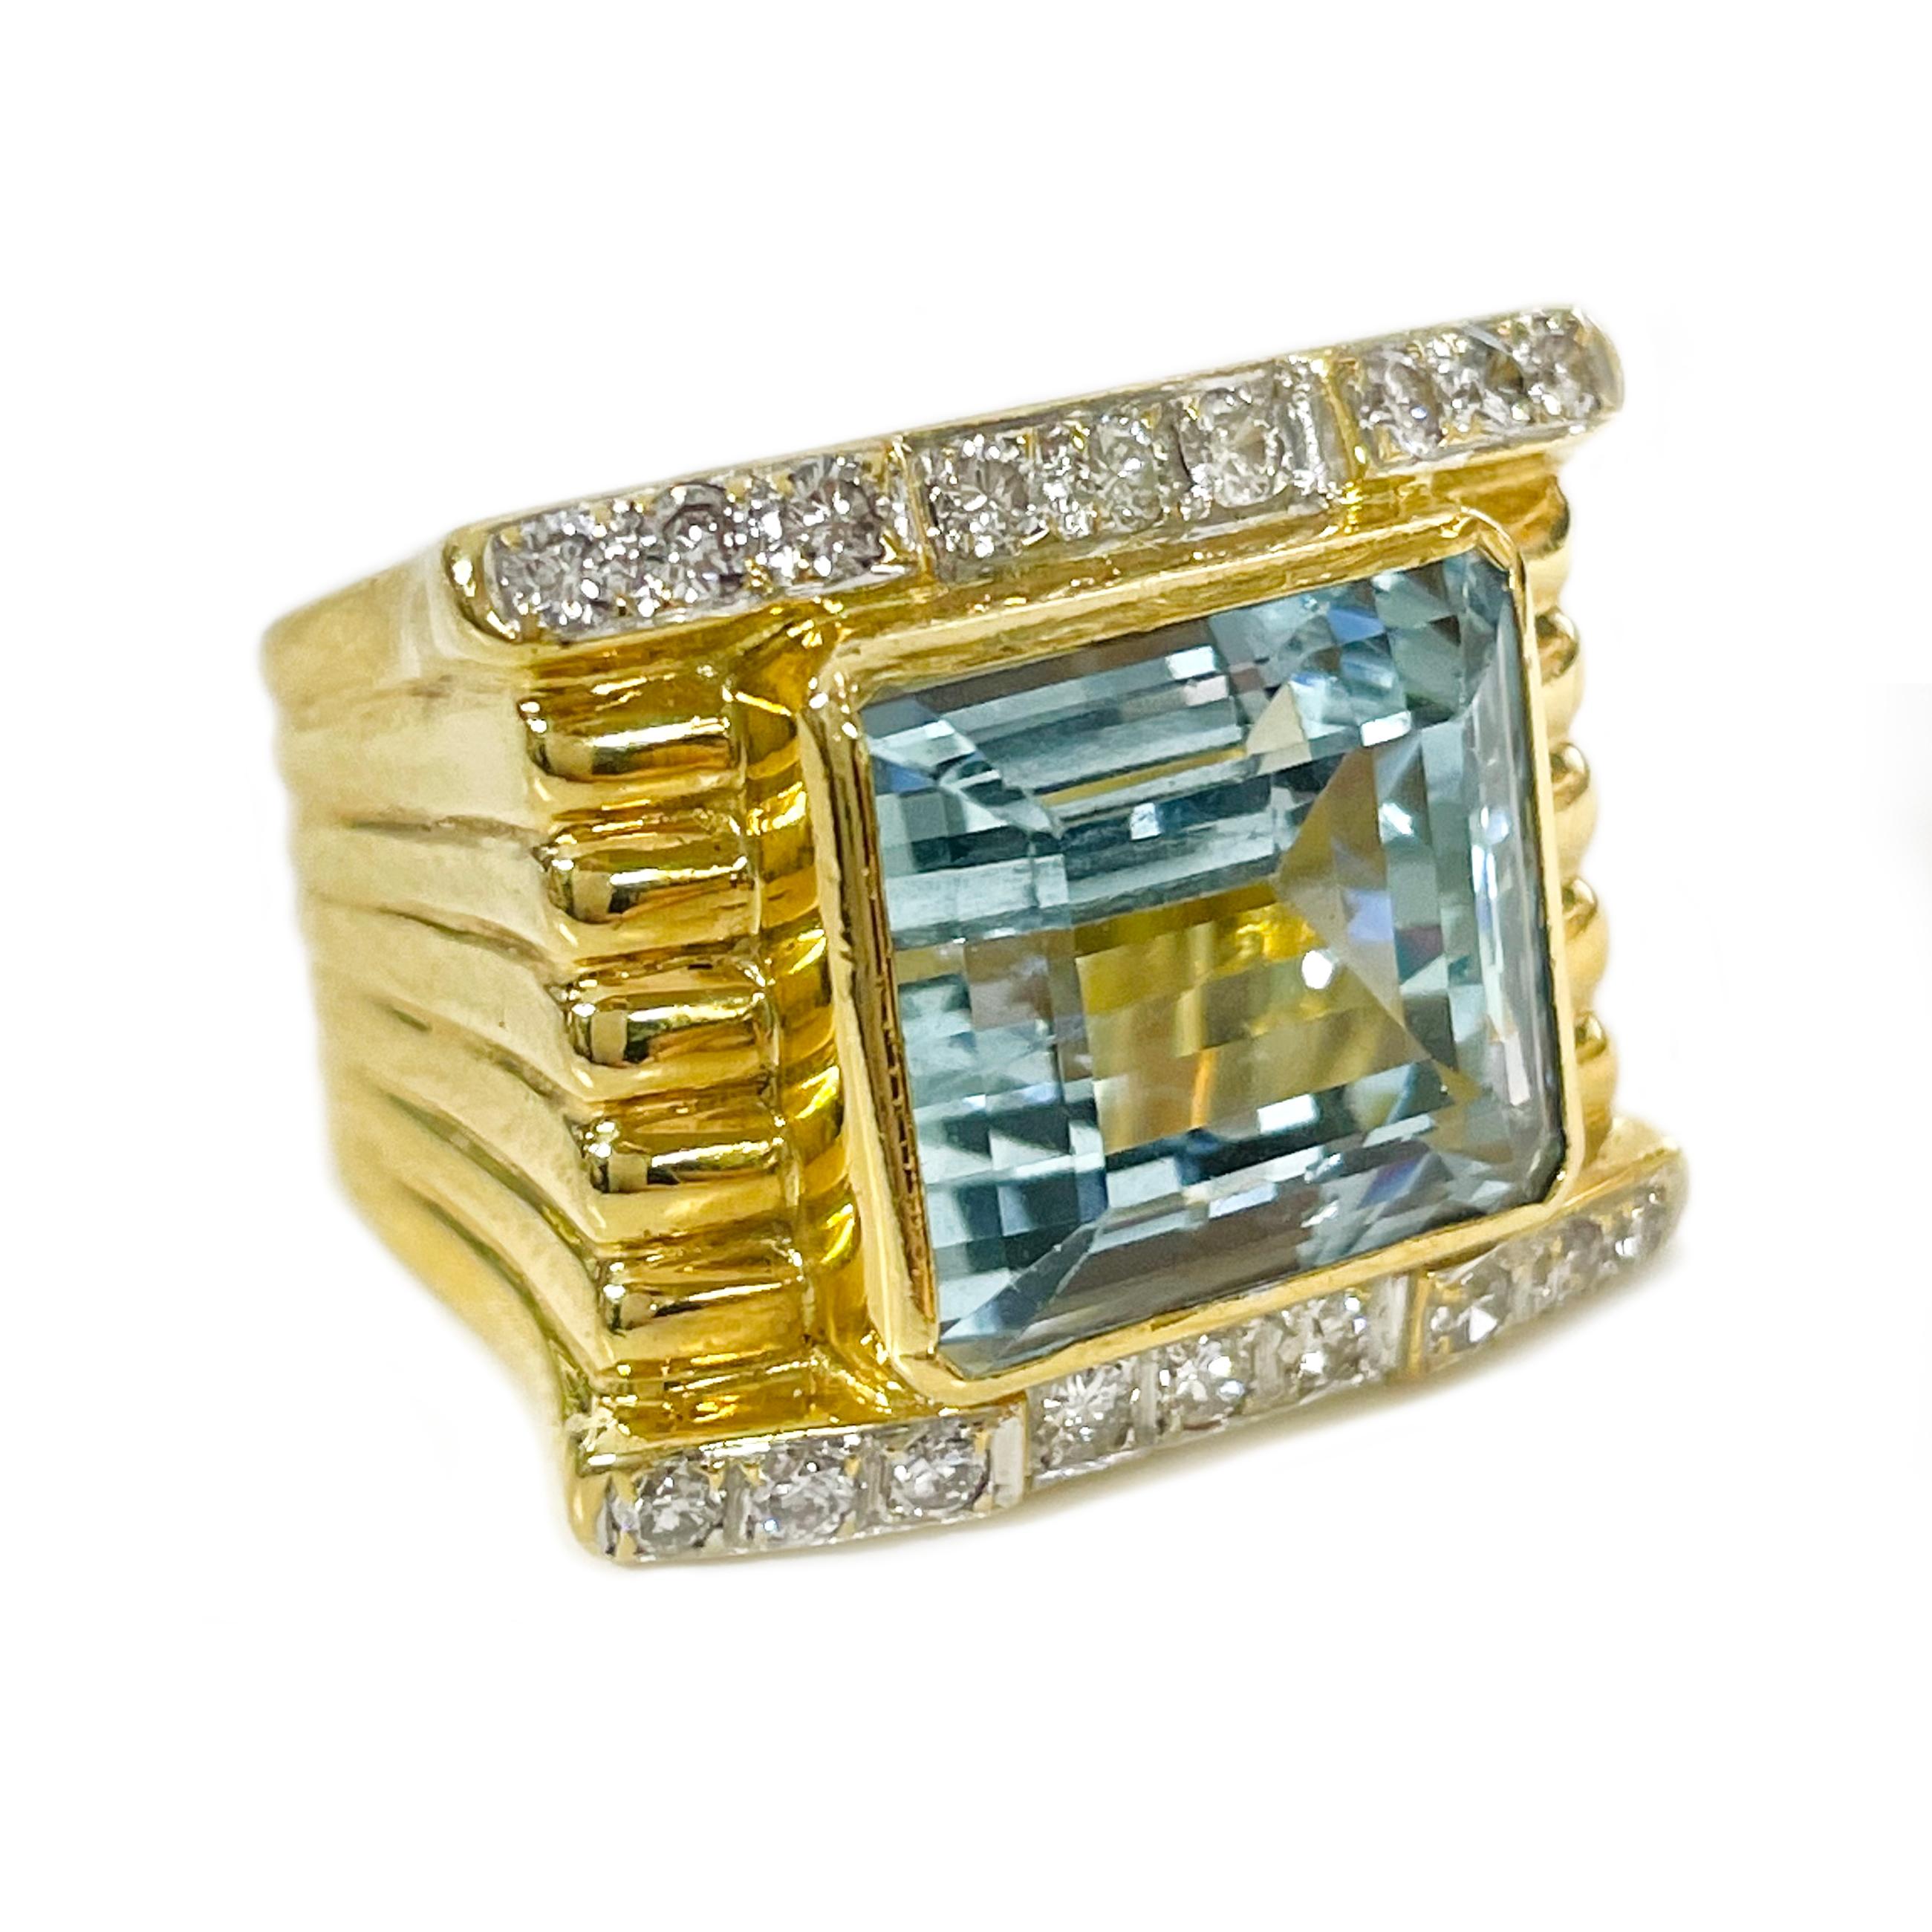 18 Karat Yellow Gold wide band Step-Cut Aquamarine, 19.4 Carat. The ring features a large step-cut Aquamarine gemstone bezel-set in the center of a wide ridged band. One row of round diamonds is bead-set in white gold on the top and another row at